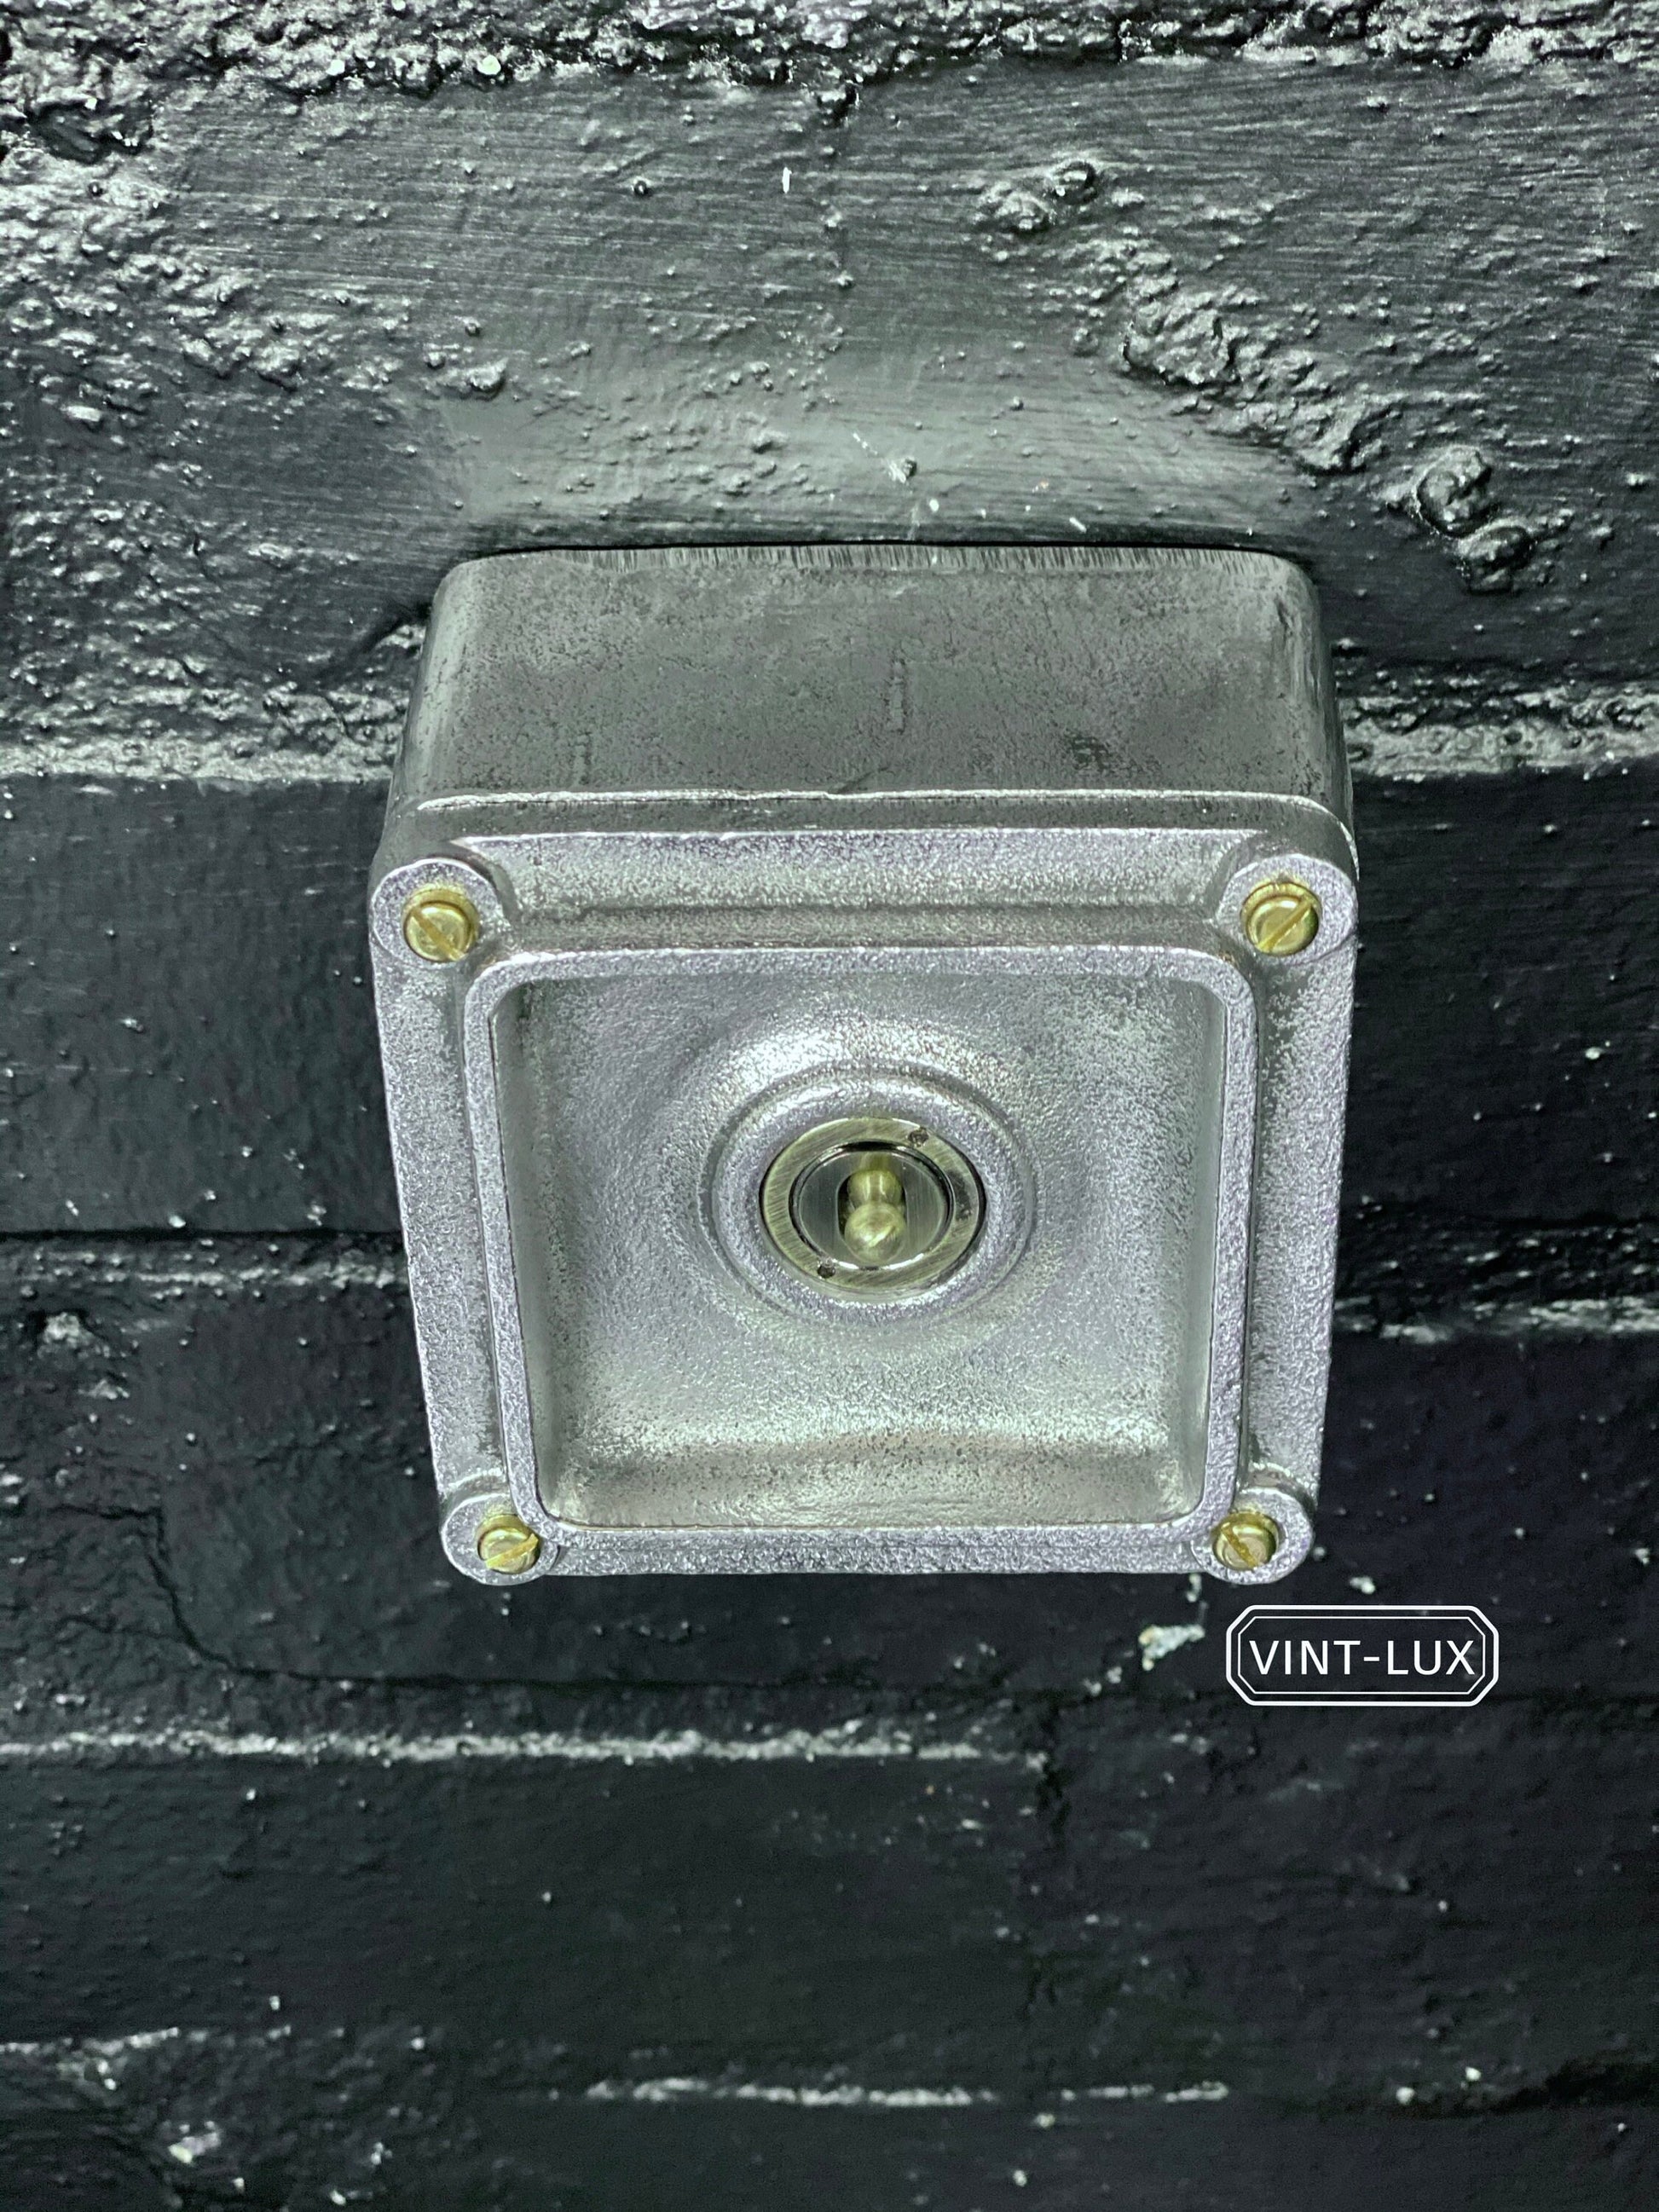 XL Single Gang Solid Cast Metal Conduit Light Switch Industrial 2 Way - BS EN Approved Vintage Crabtree 1950’s Style